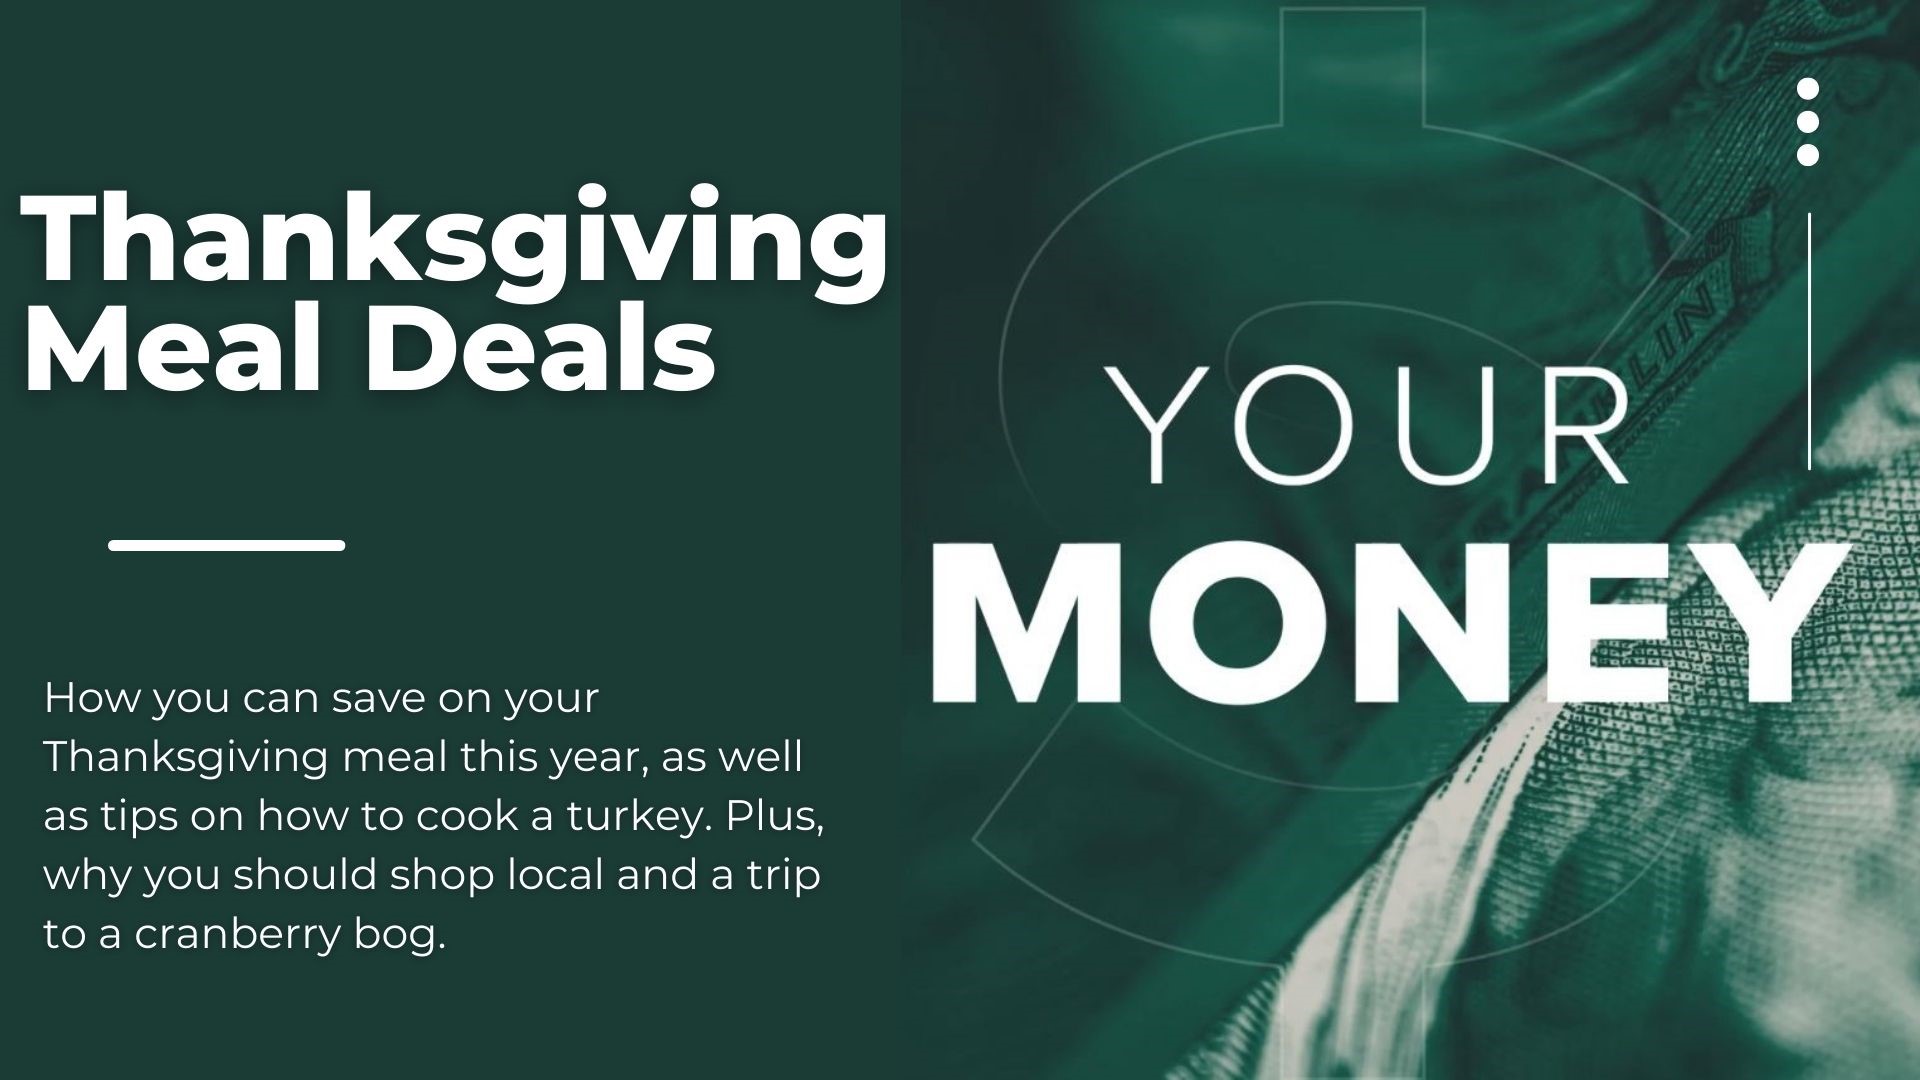 How you can save on your Thanksgiving meal this year, as well as tips on how to cook a turkey. Plus, why you should shop local and a trip to a cranberry bog.